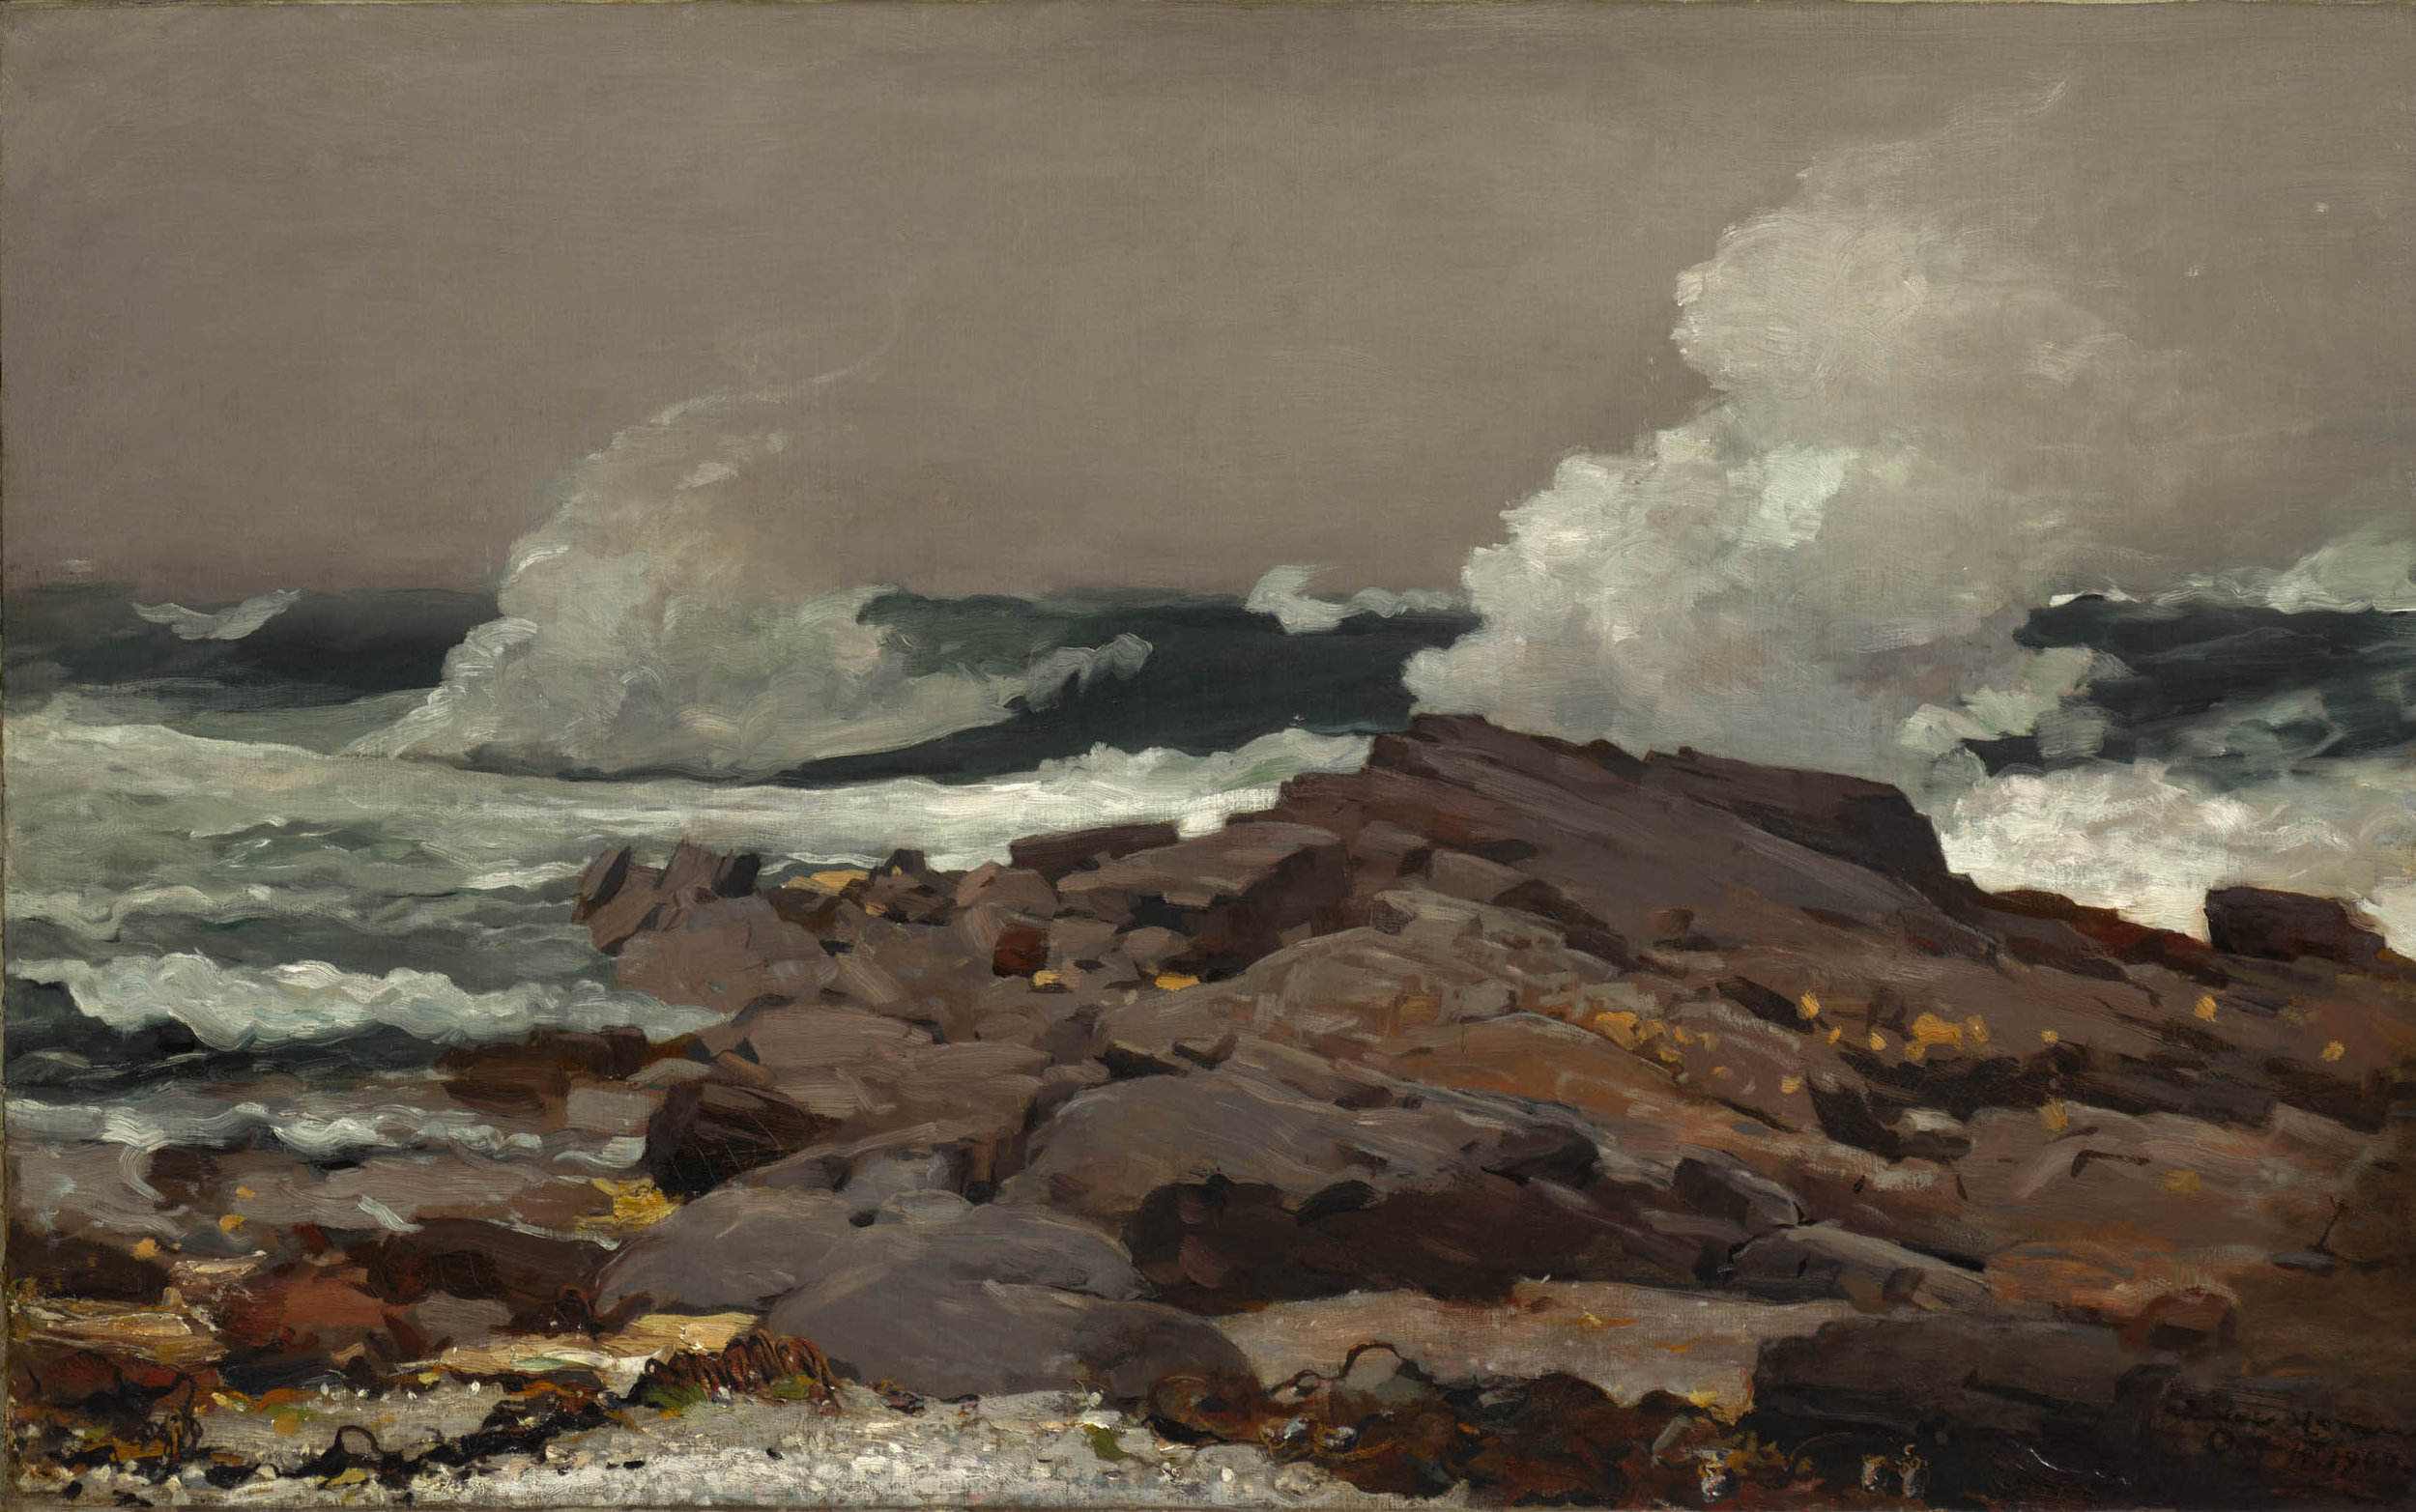  Winslow Homer (American; 1836–1910); Eastern Point; 1900. Oil on canvas; 30 1/4 x 48 1/2 in. (76.8 x 123.2 cm). Sterling and Francine Clark Art Institute; Williamstown; Massachusetts; 1955.6 